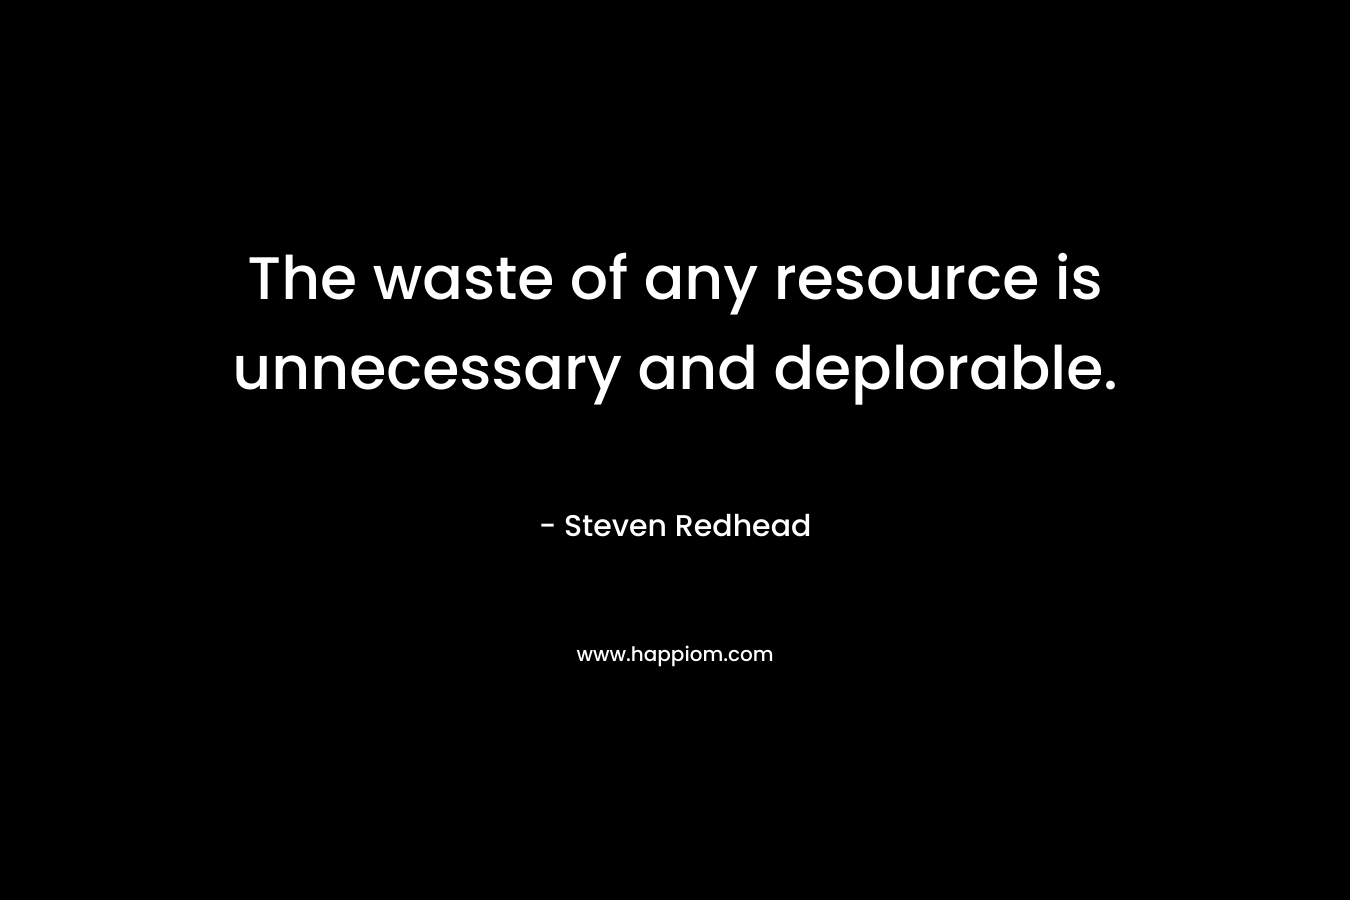 The waste of any resource is unnecessary and deplorable. – Steven Redhead